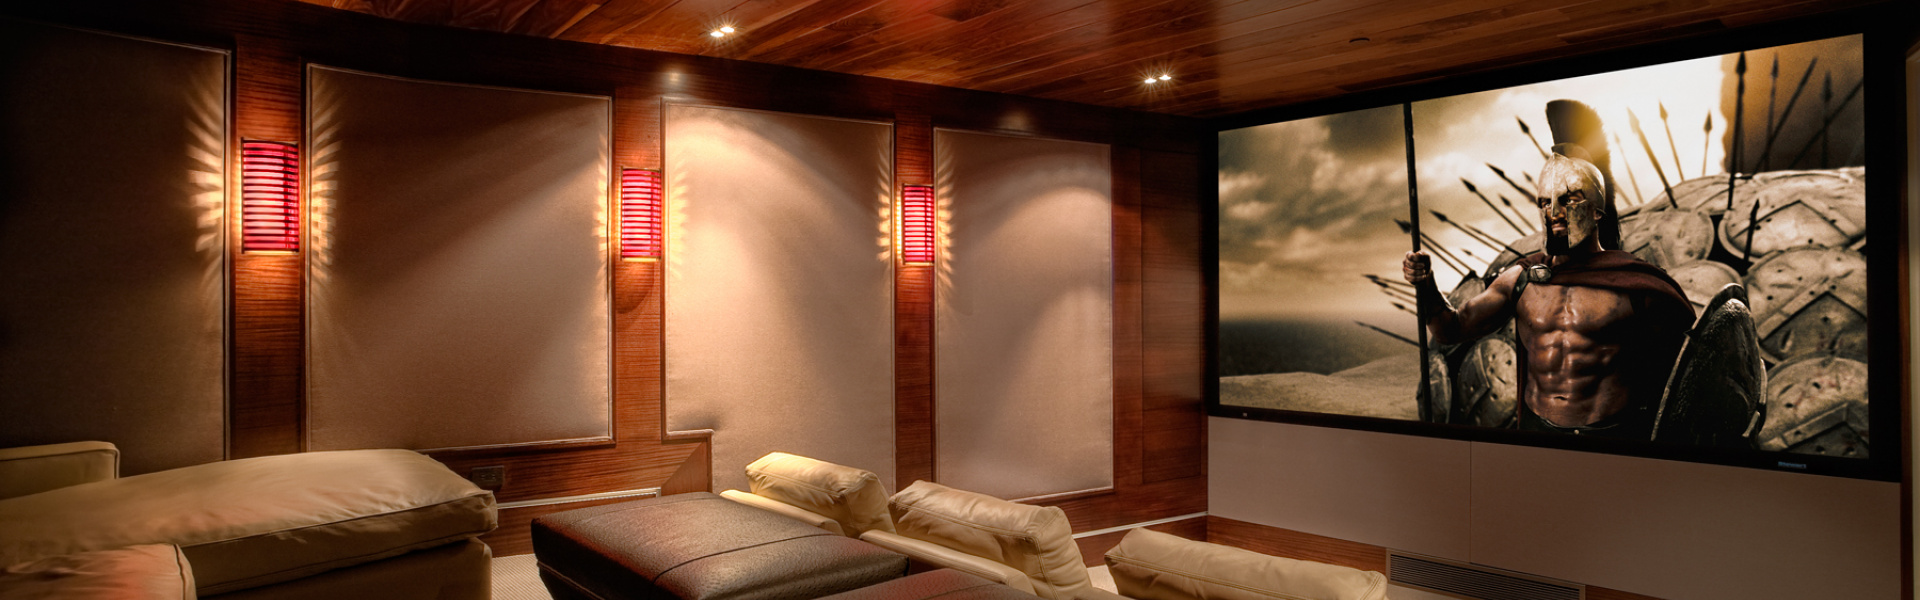 Smart home installation by Audio Integrations for Las Vegas